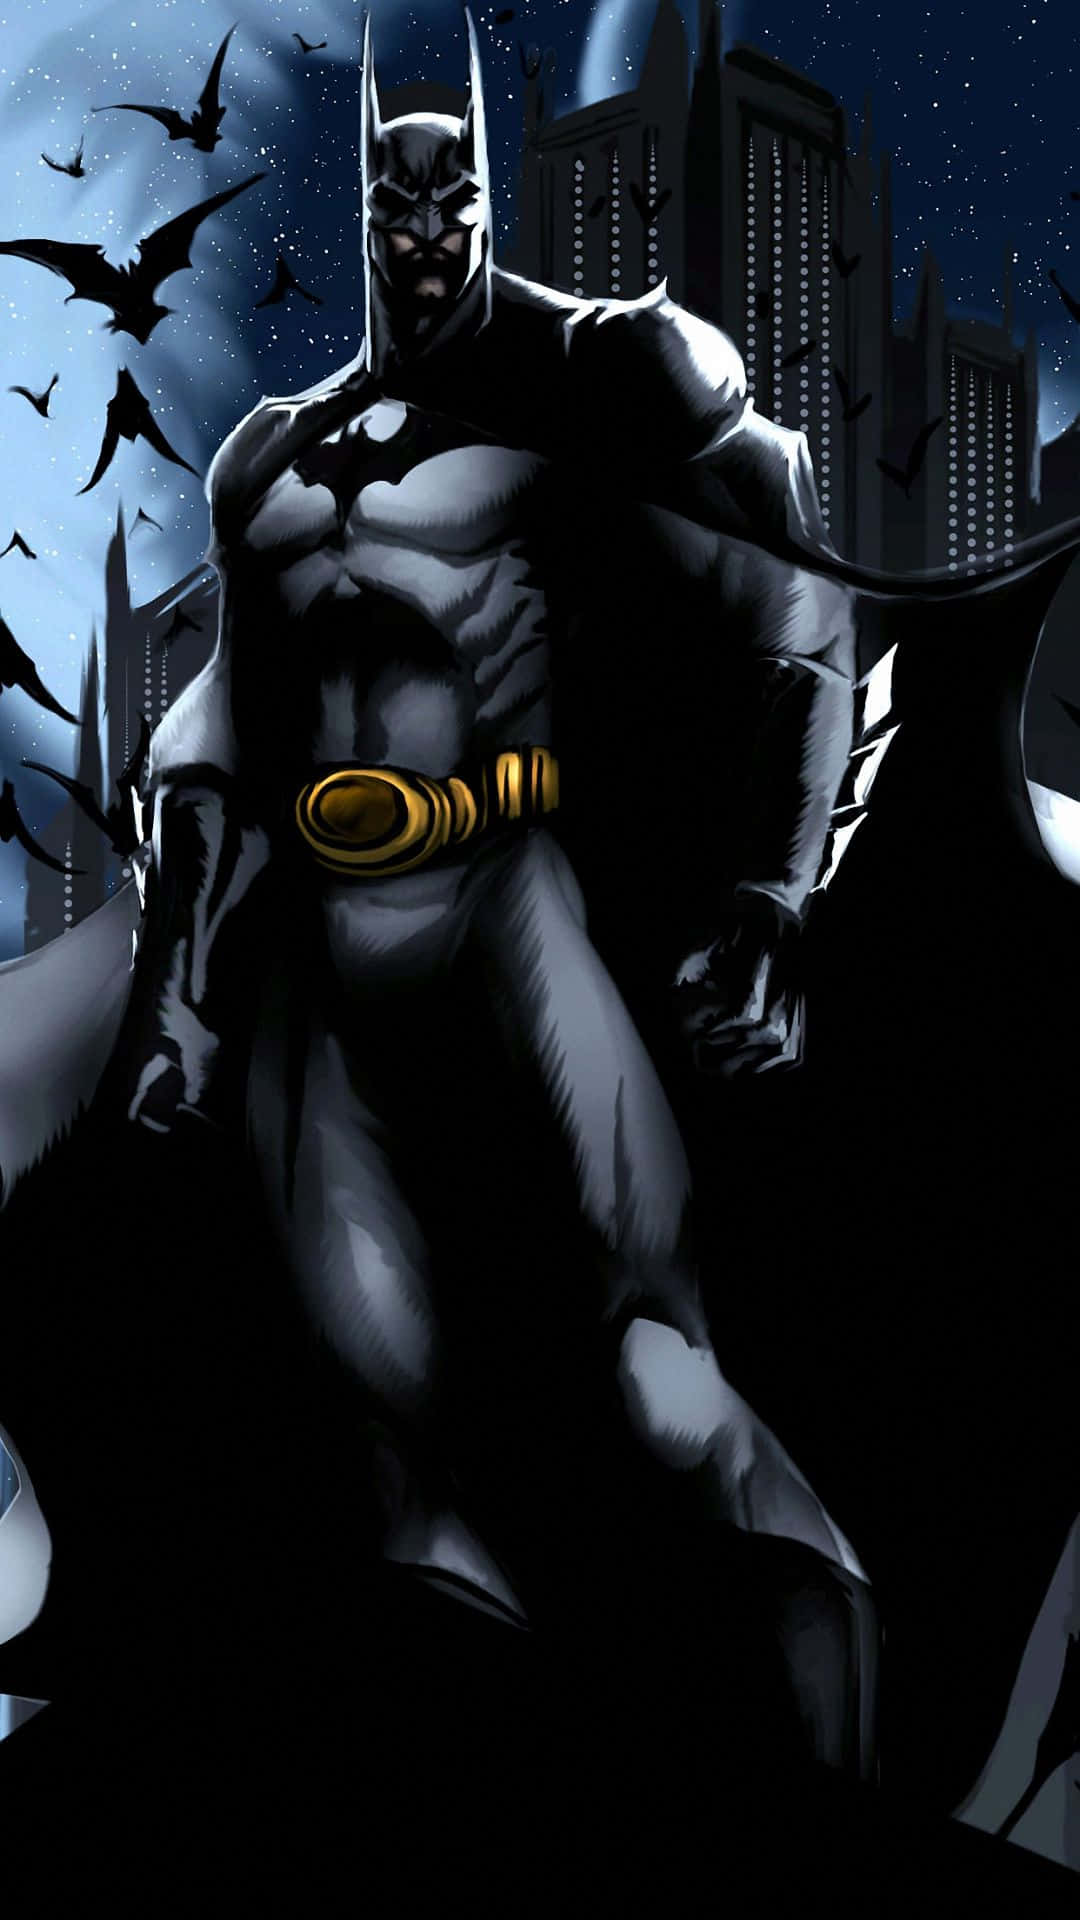 Transform from Bruce Wayne to Batman instantly with this Android phone! Wallpaper